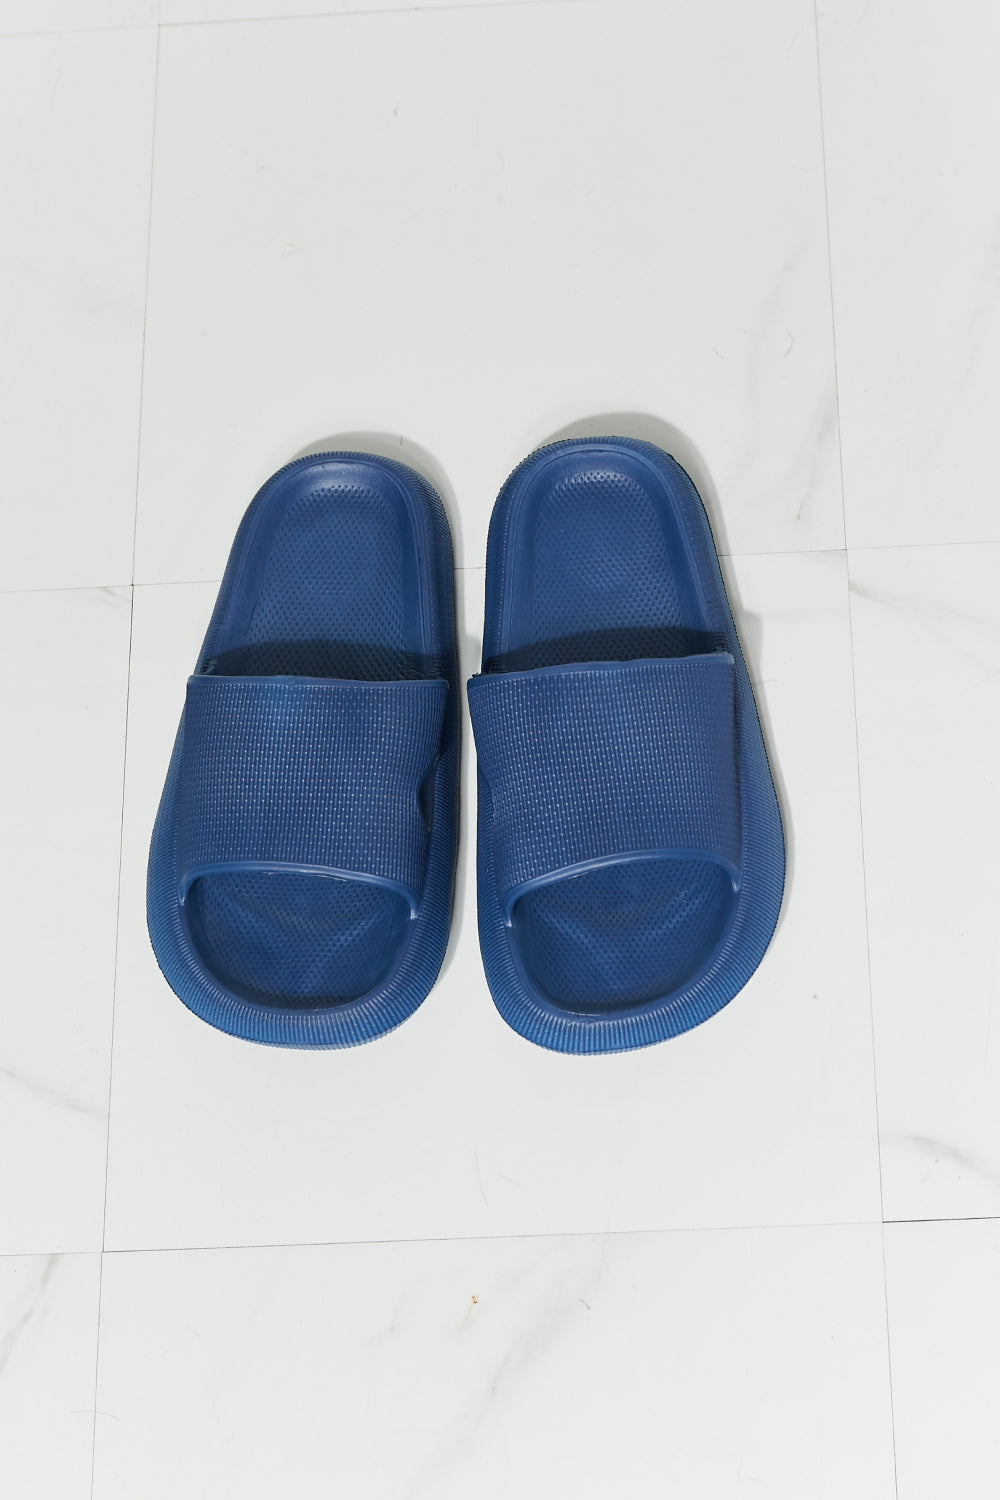 MMShoes Arms Around Me Open Toe Slide in Navy - Shop women apparel, Jewelry, bath & beauty products online - Arwen's Boutique